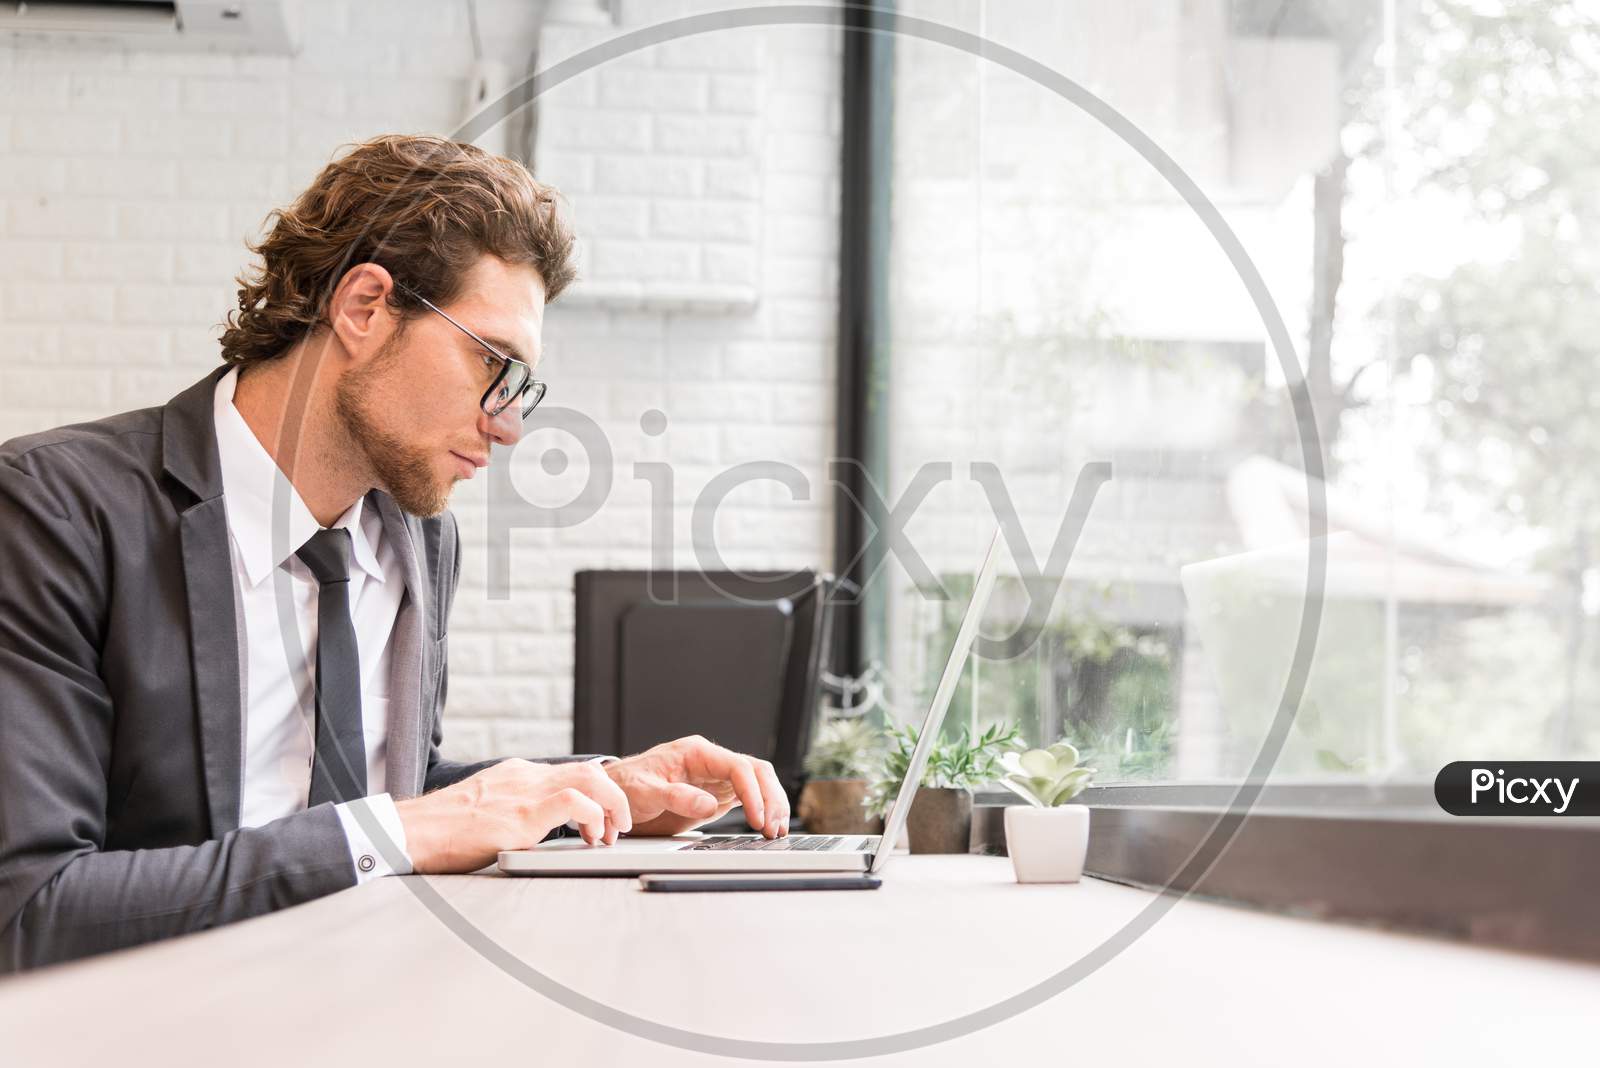 Business Man Working Hard With Laptop On Desk In Office Near Window. Business And Success Concept. People And Occupation Concept. Technology And Computer Theme. Indoors And Interior Theme